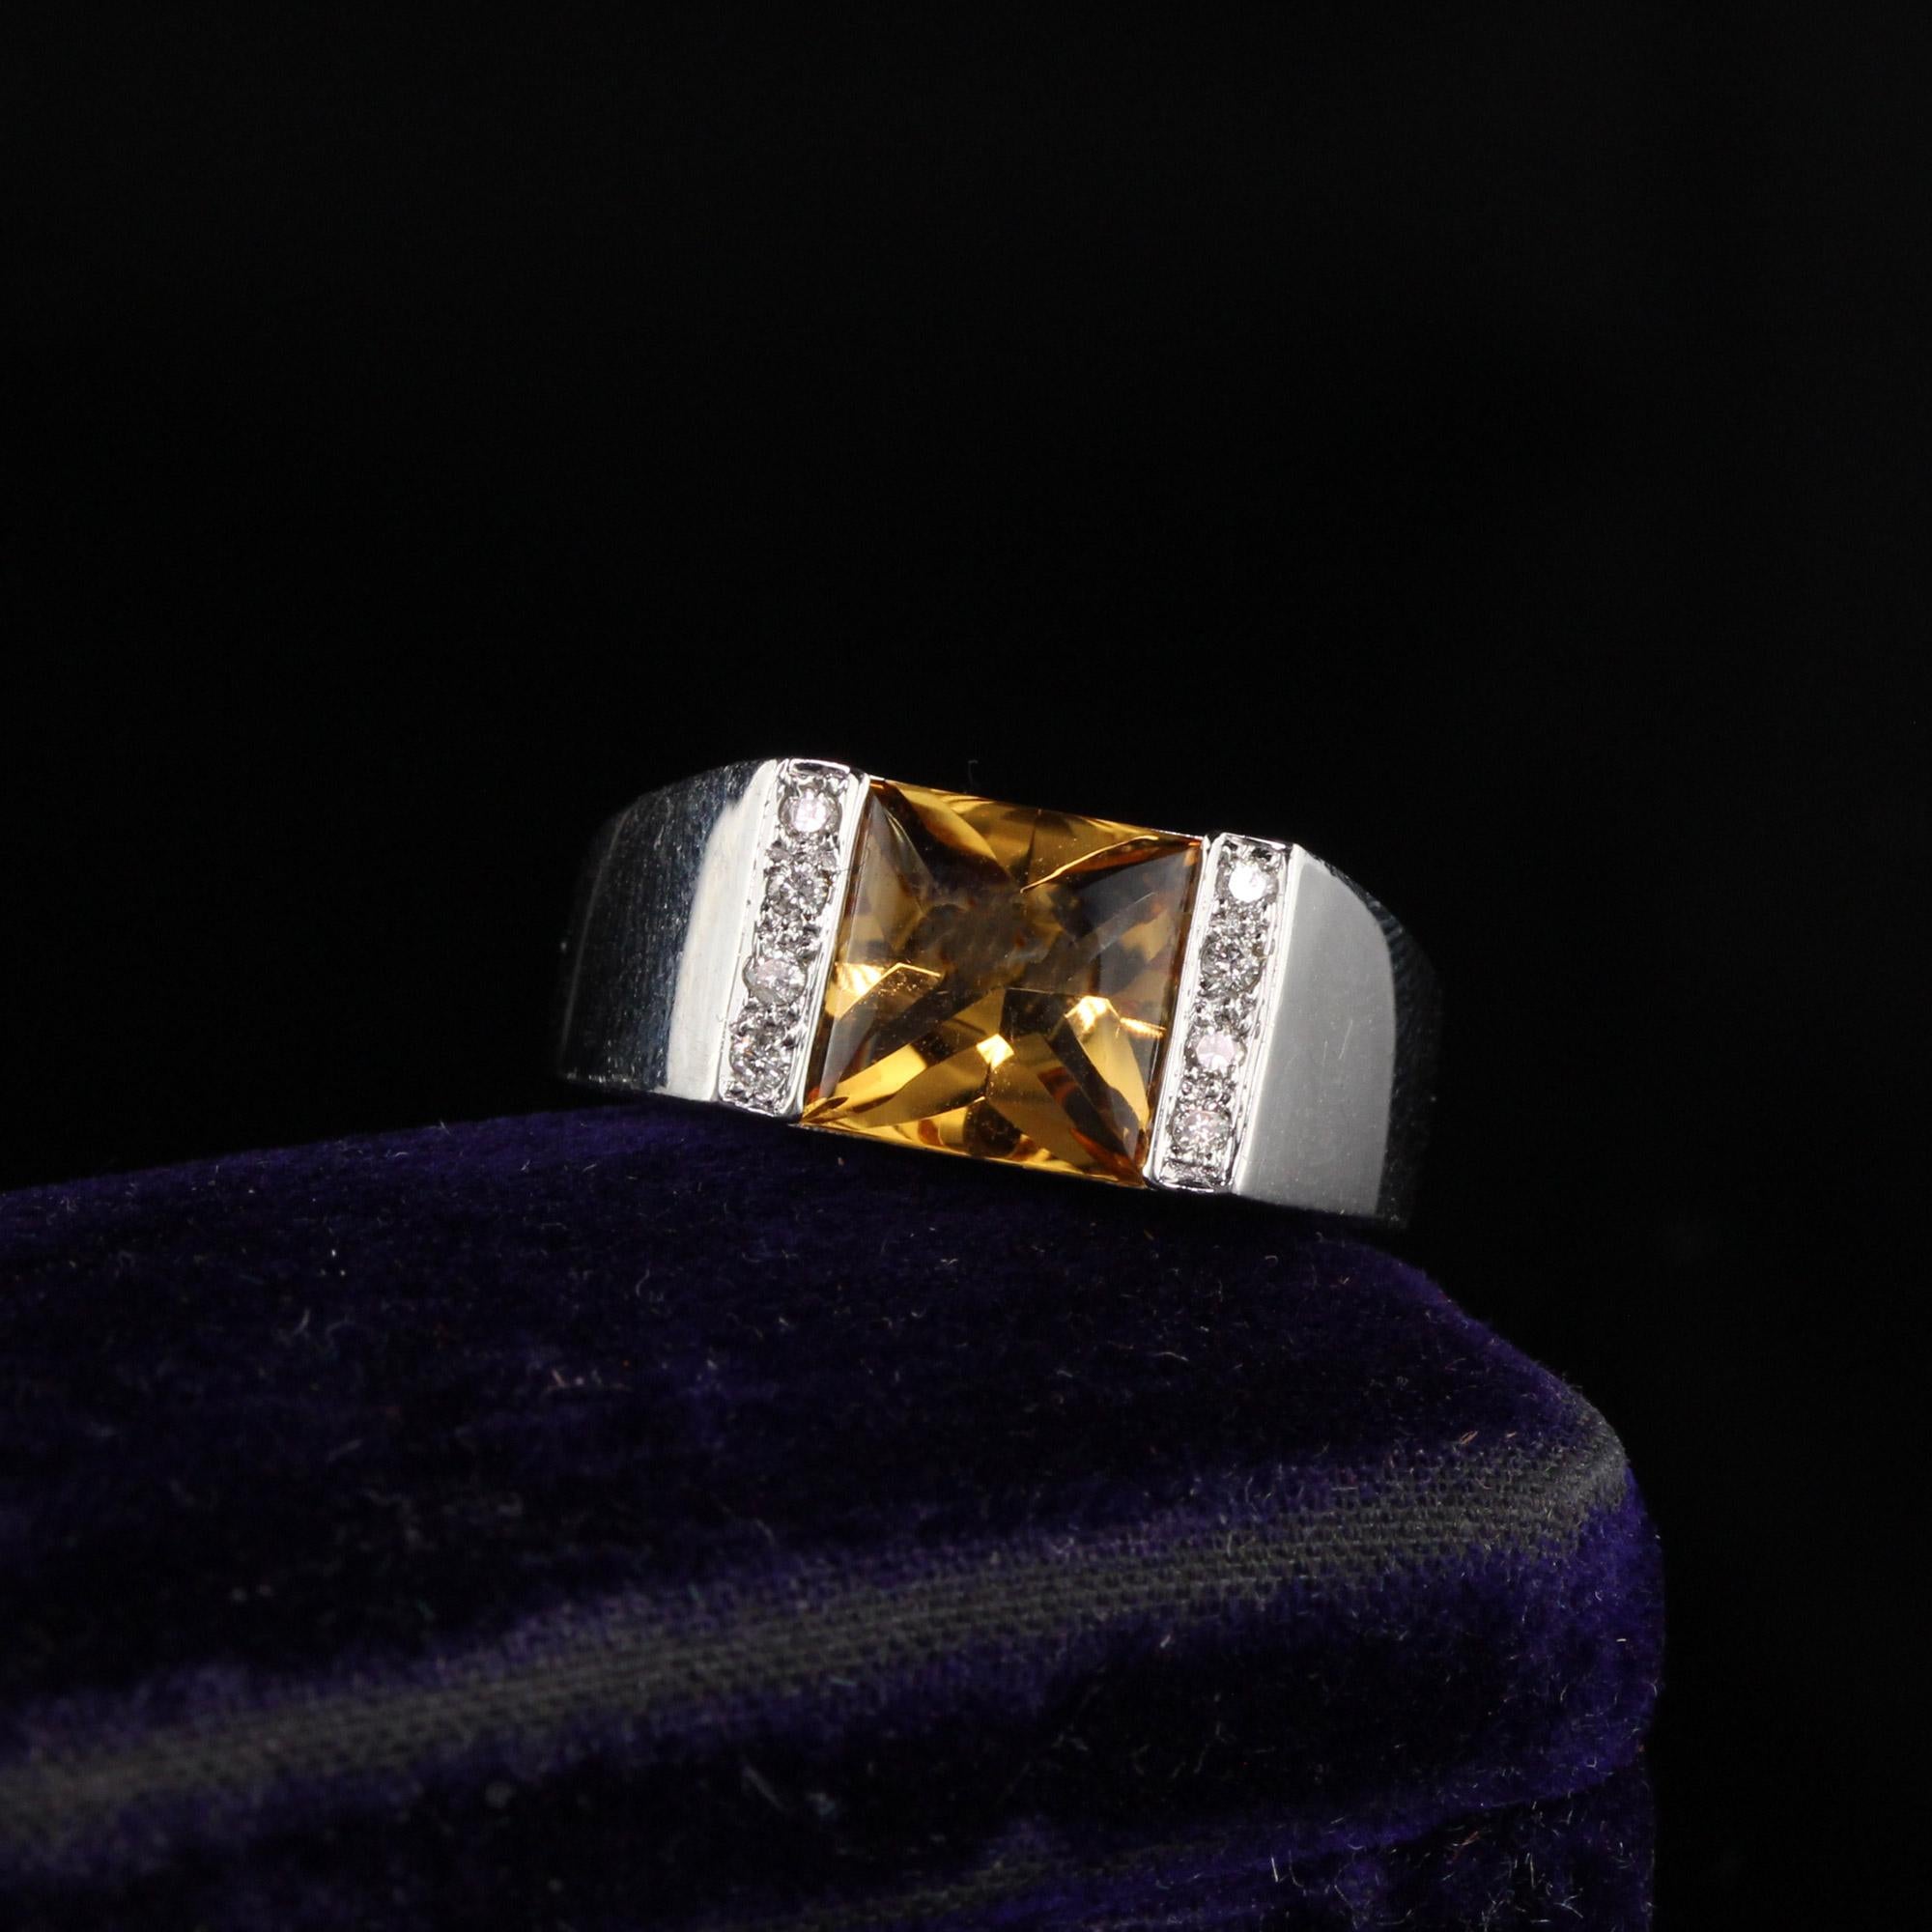 Beautifully designed diamond ring with citrine center stone.

Metal: 14K White Gold

Weight: 6.1 Grams

Total Diamond Weight: Approximately 0.05 ct.

Diamond Color: H

Diamond Clarity: SI1

Gemstone Measurements: 8.05 x 7.52 mm

Ring Size: 6.5